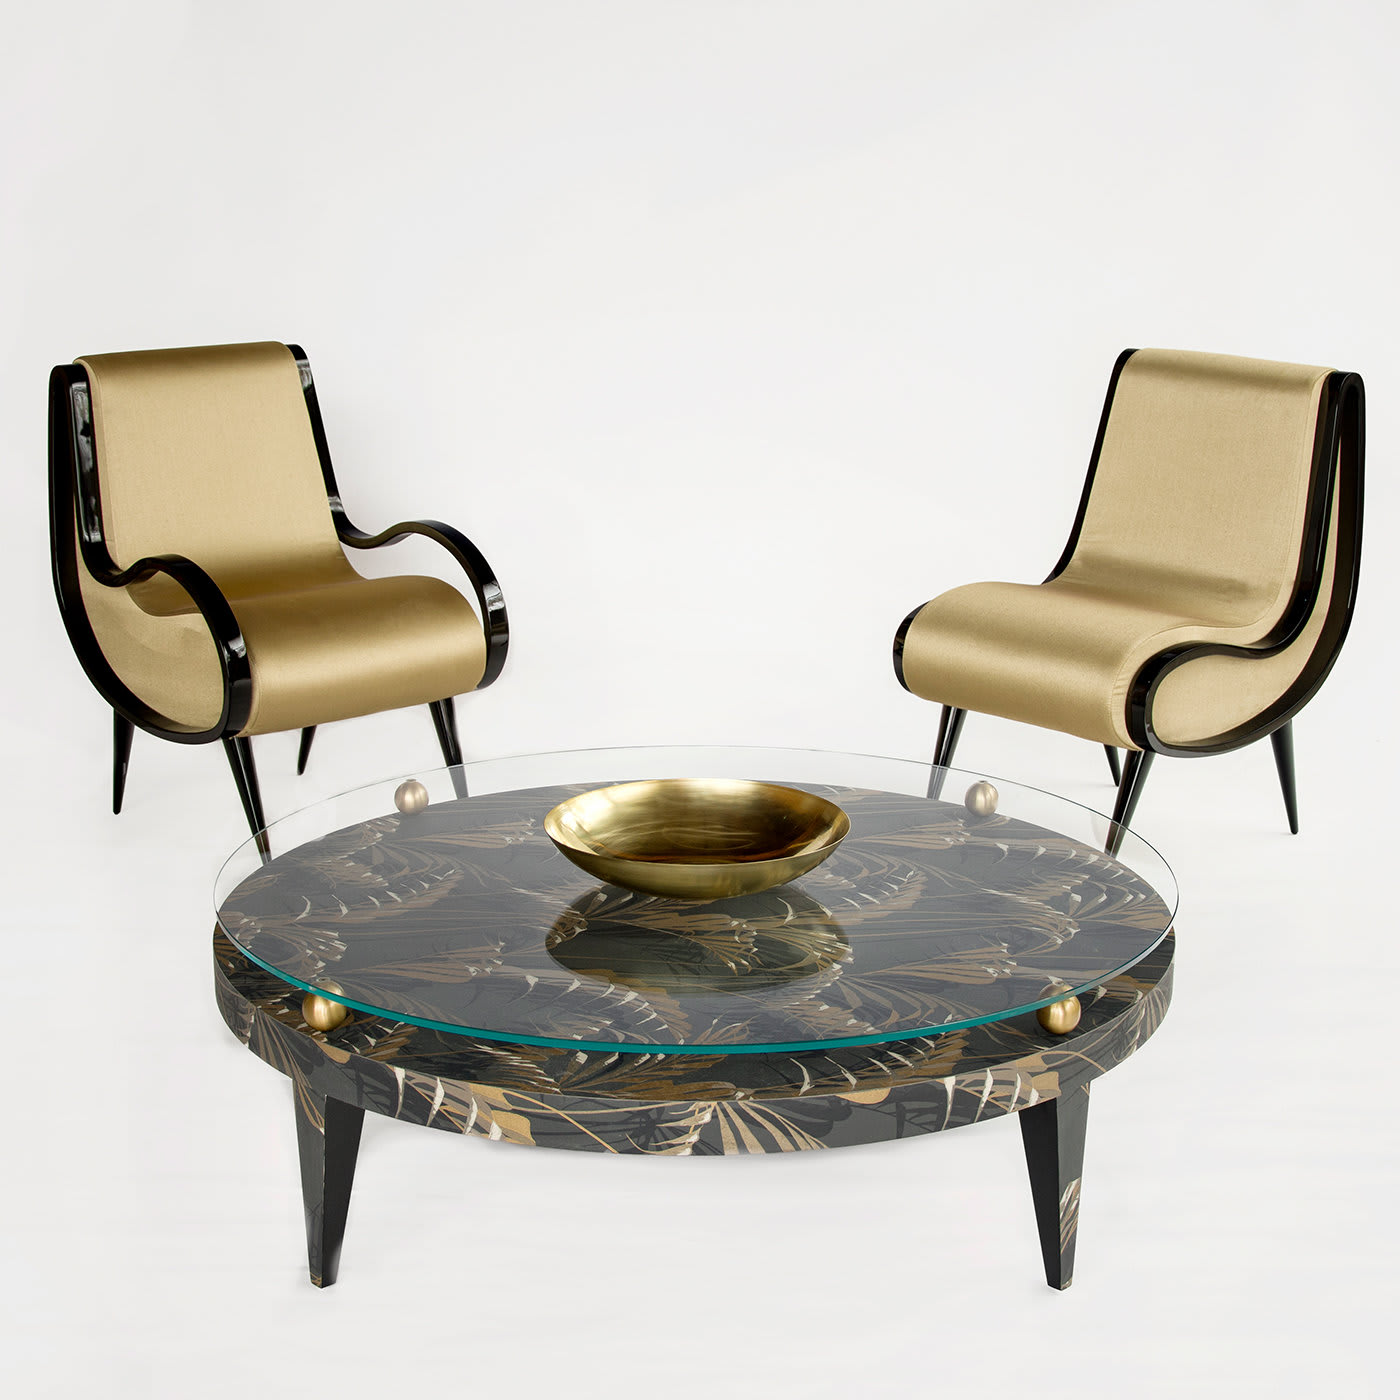 Eclipse Chair in gold fabric - Extroverso